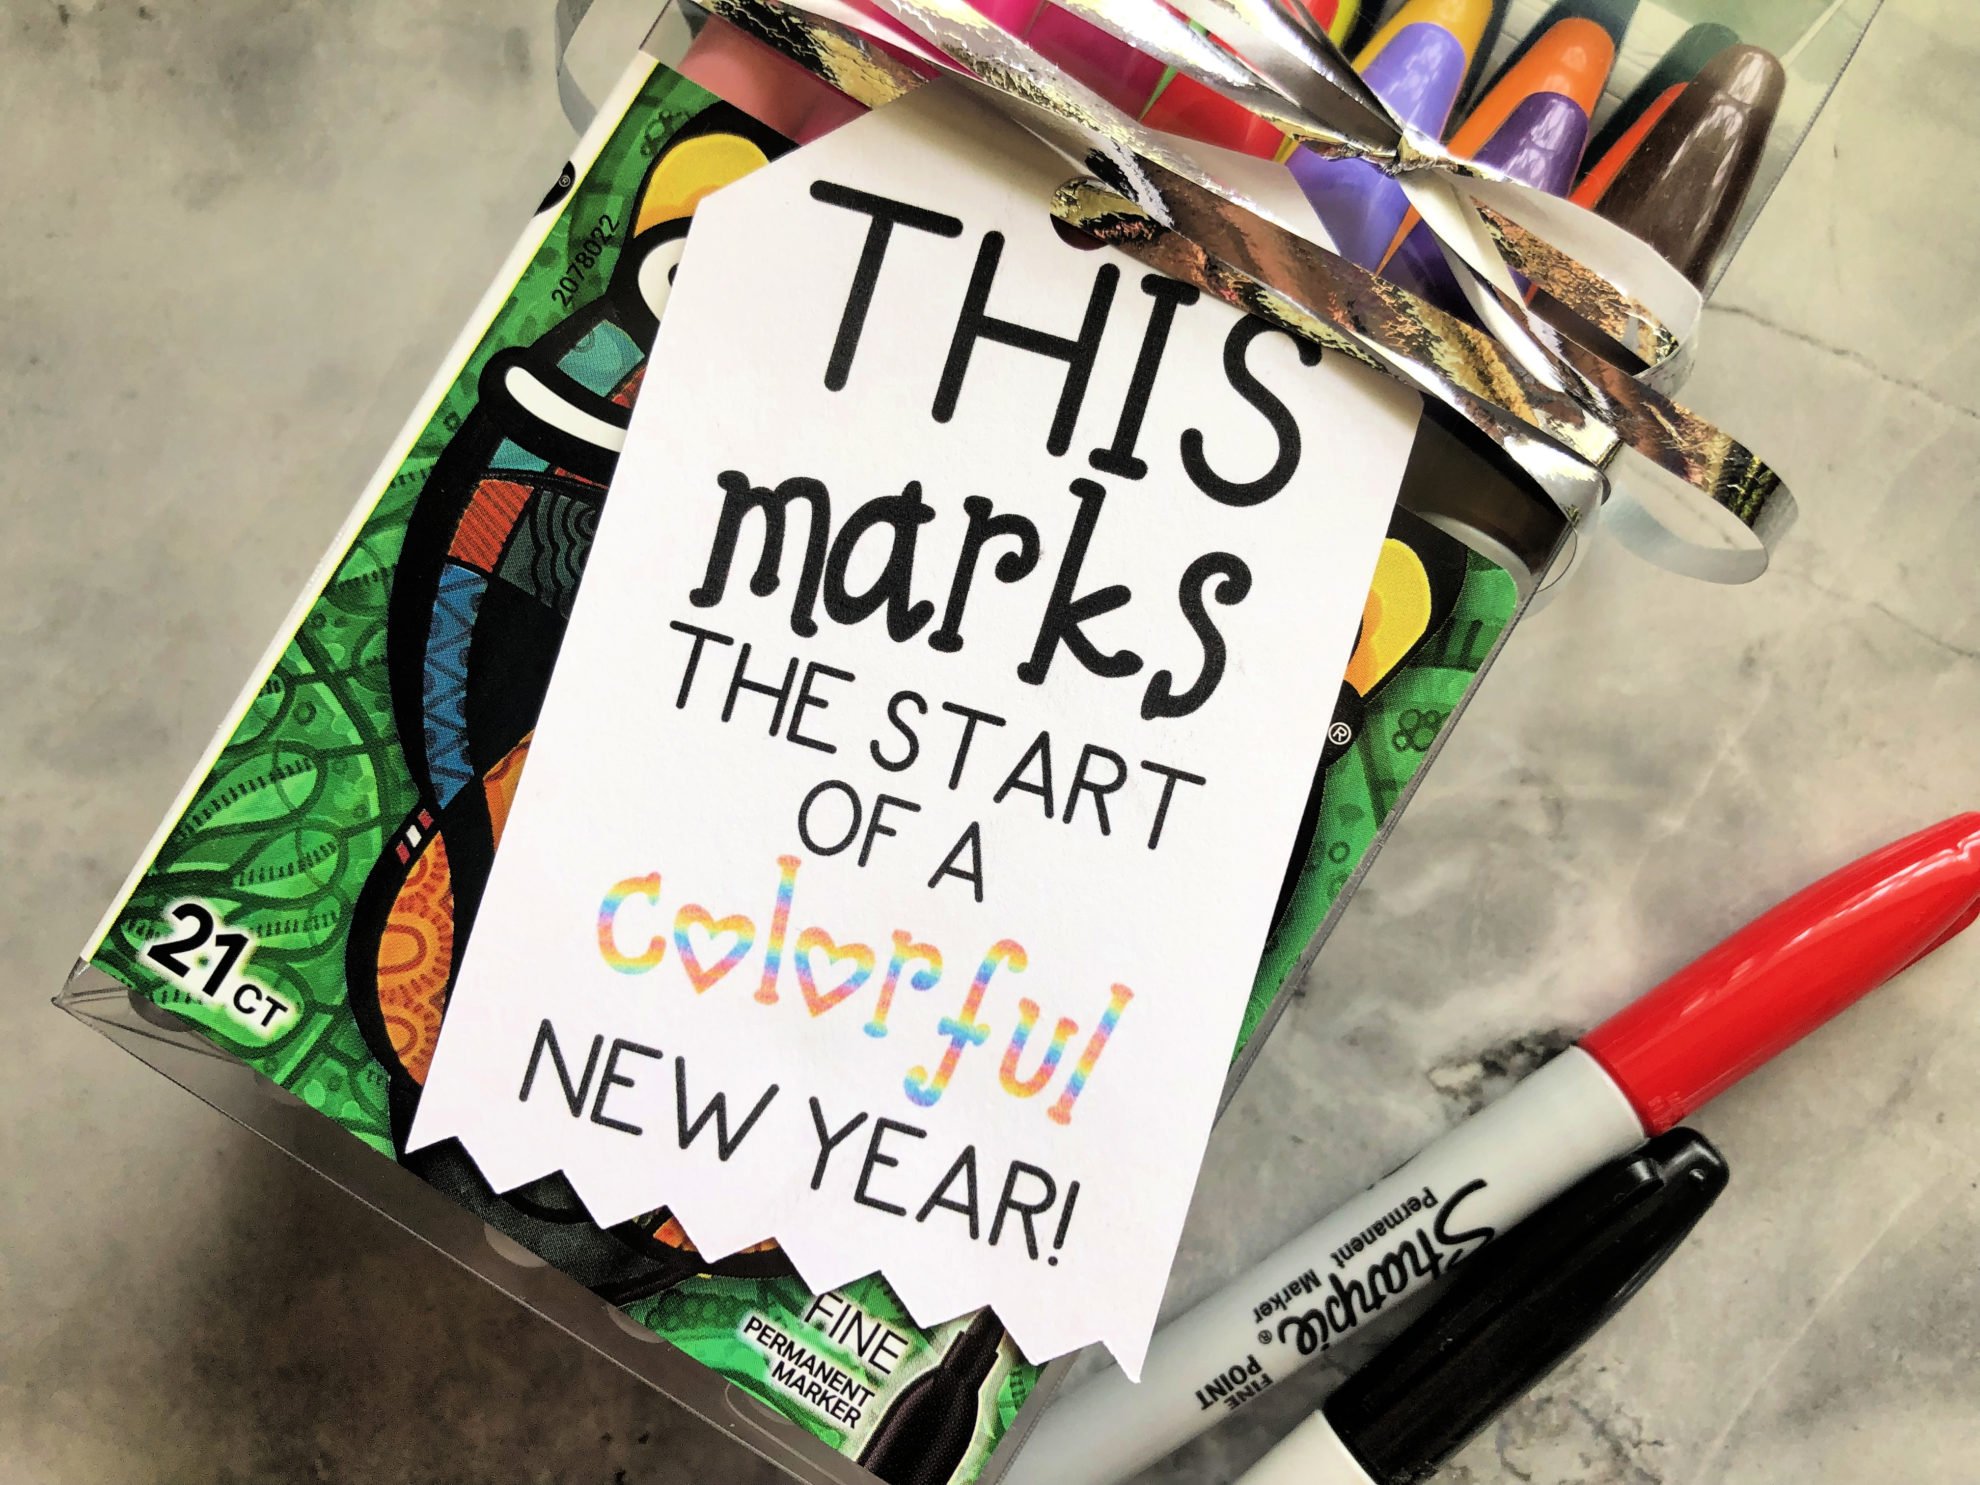 Close up of a tag that reads "this marks the start..." on a marble countertop with sharpies.